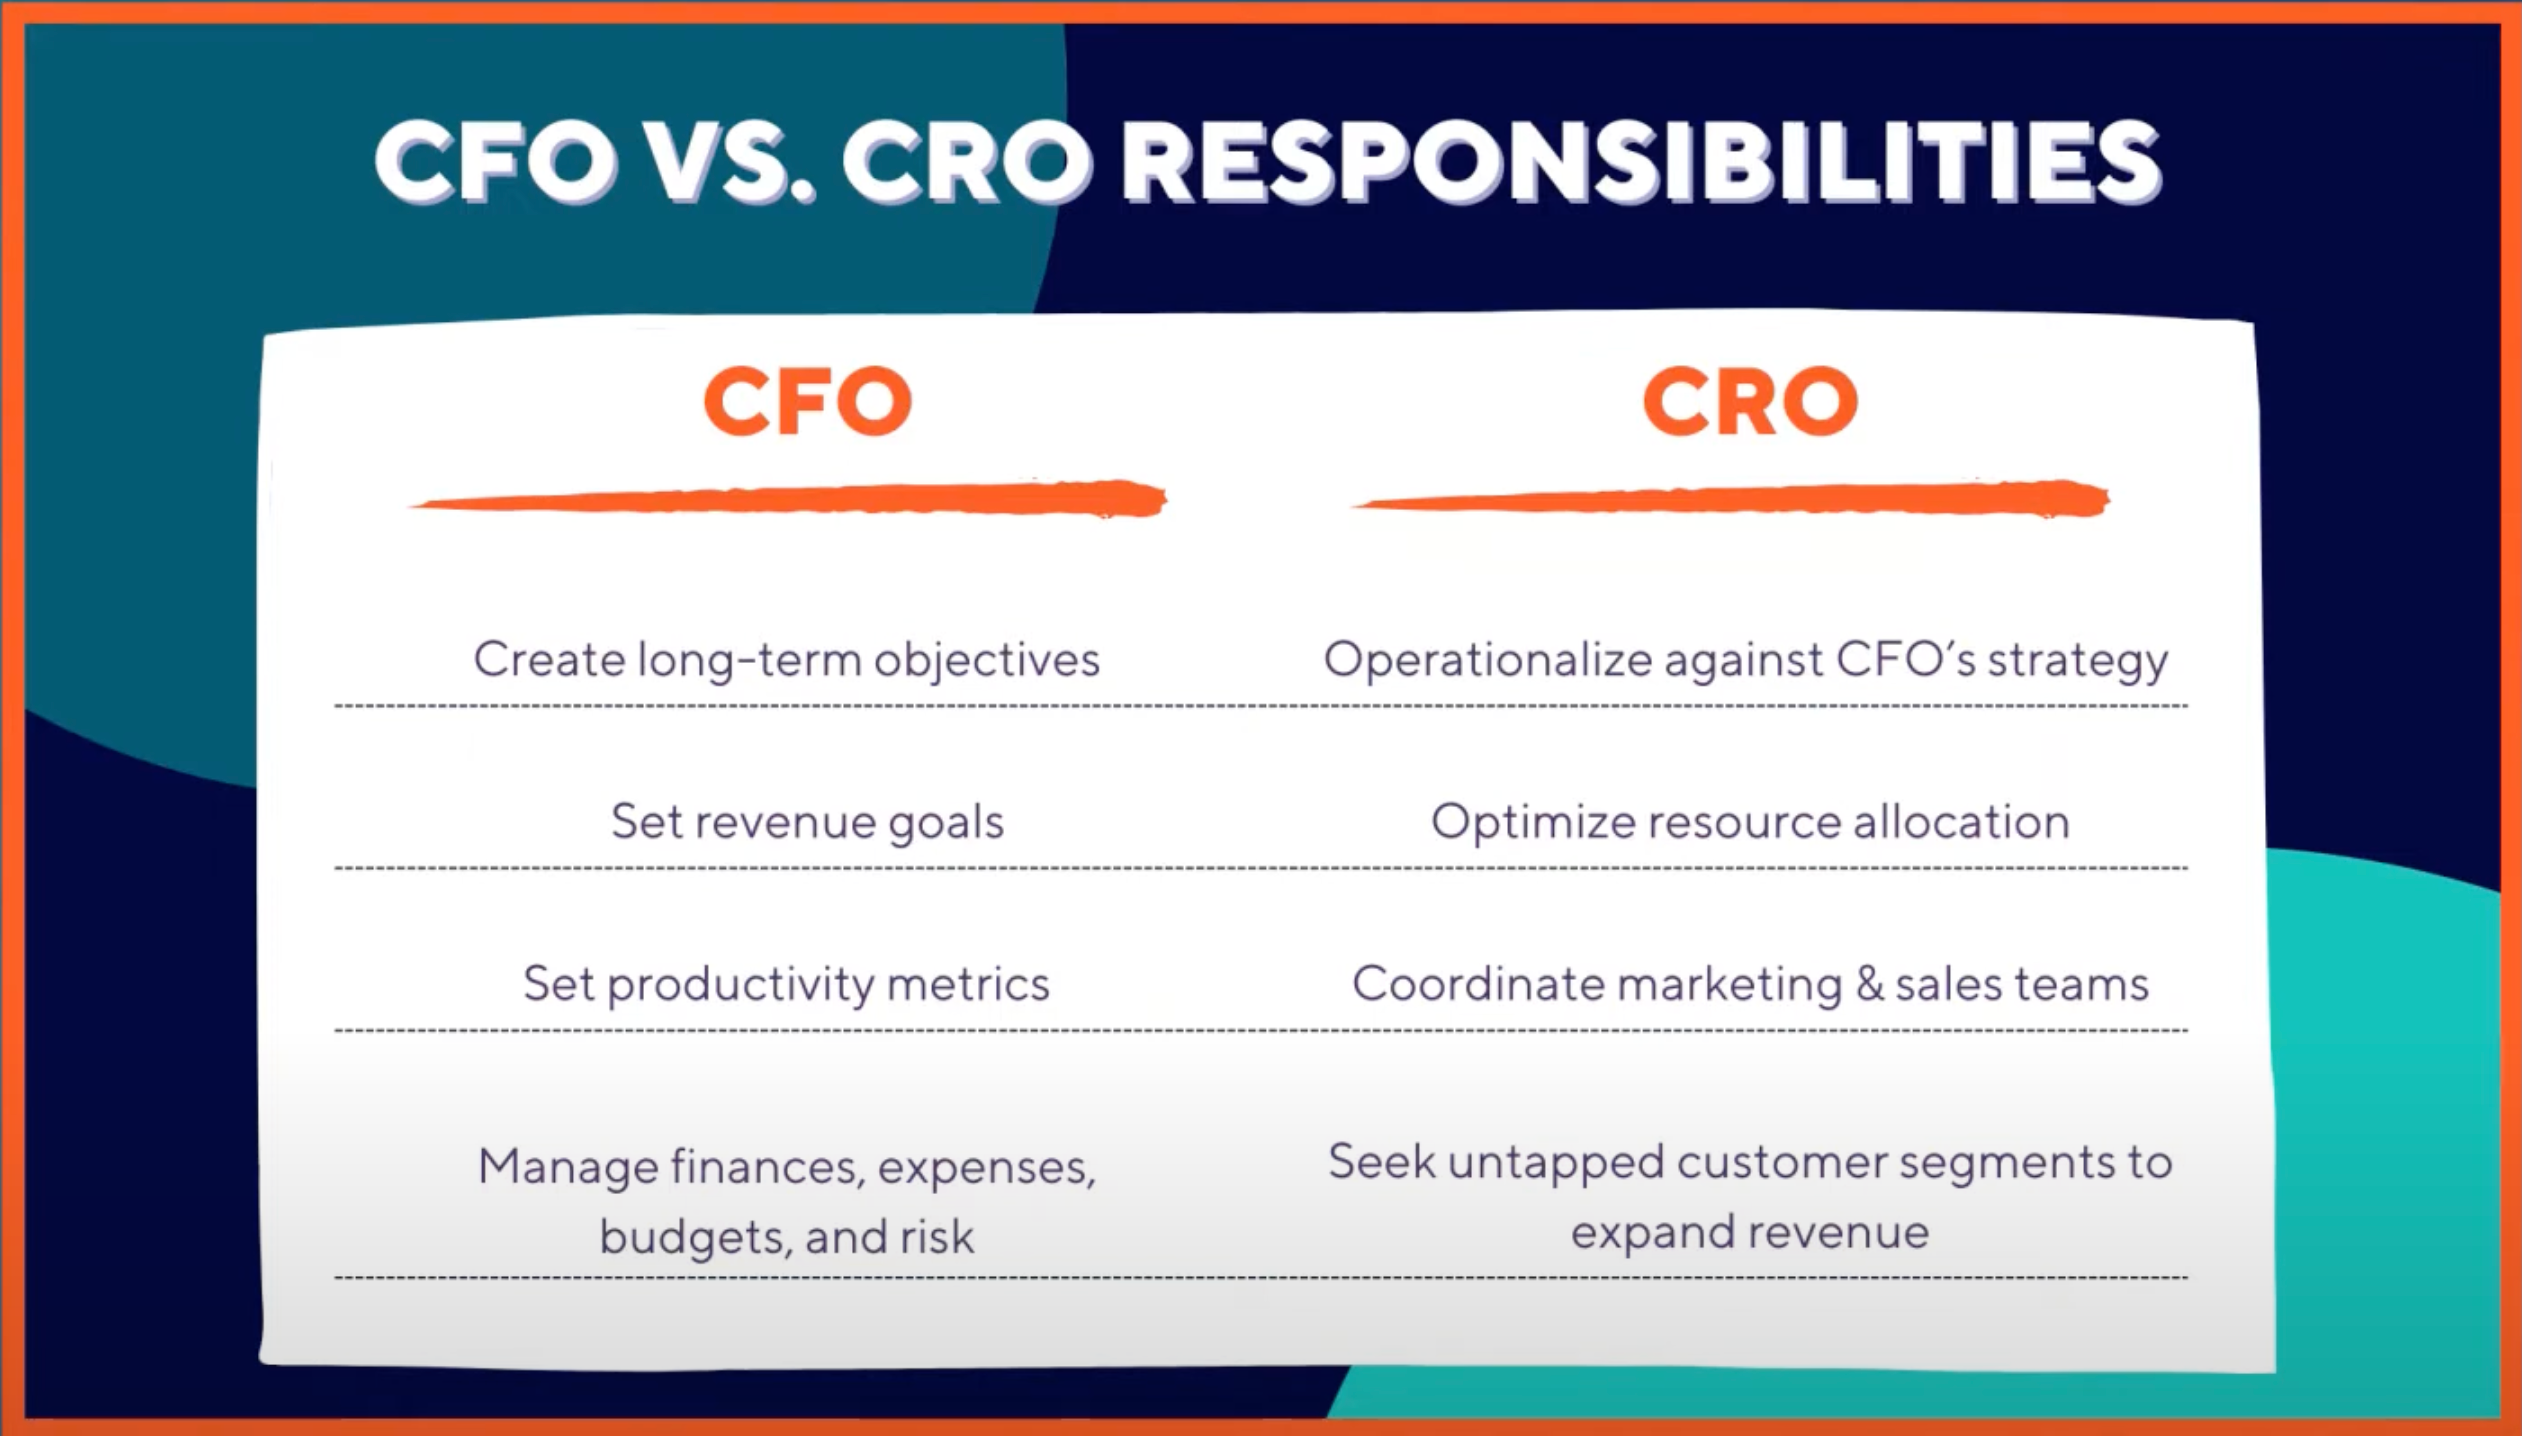 What Is a CRO Vs Ceo?